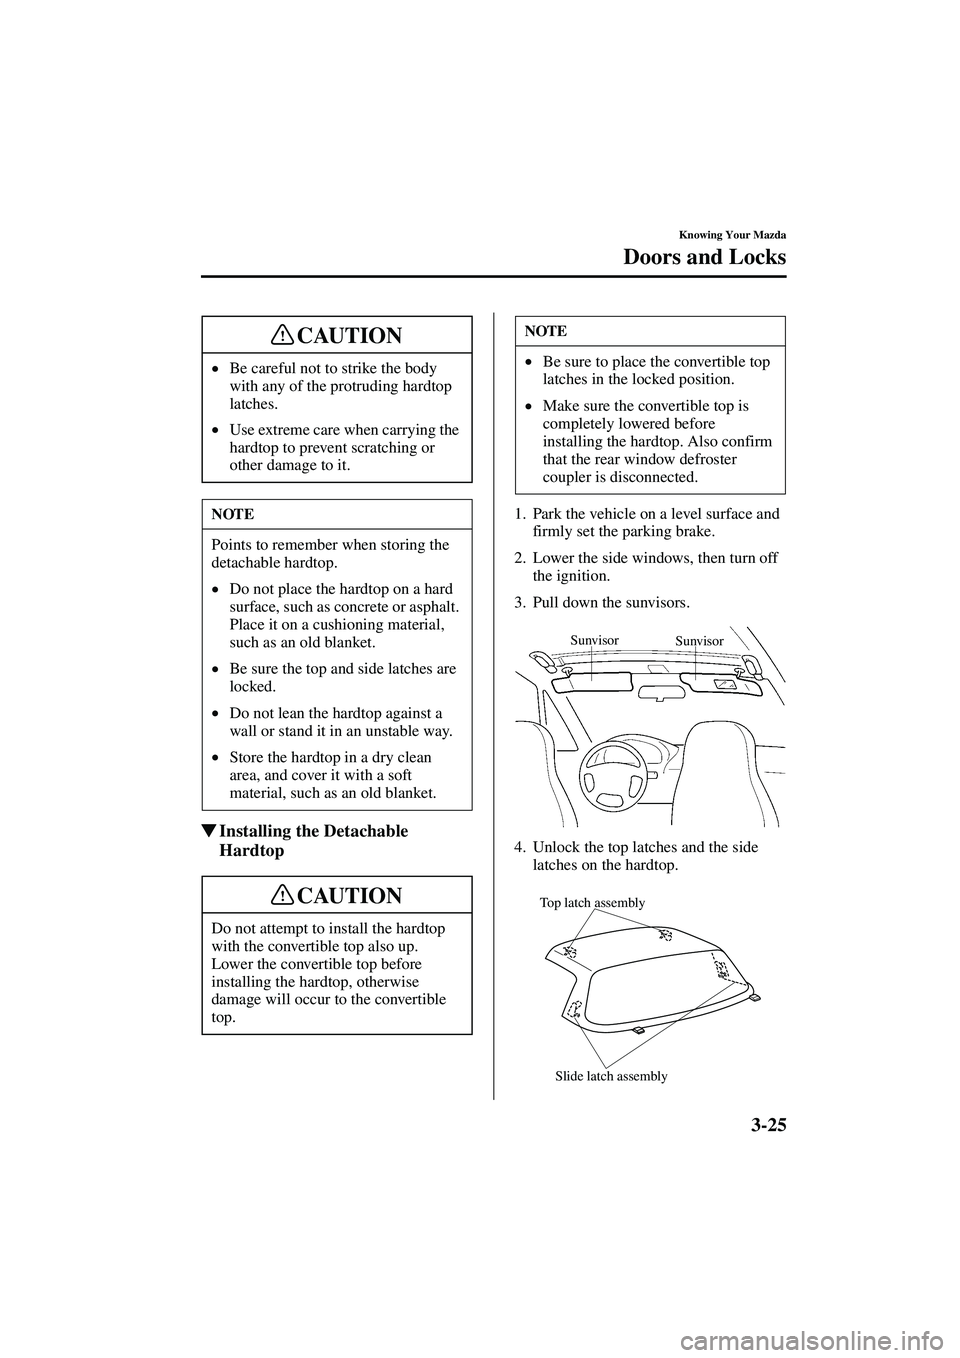 MAZDA MODEL MX-5 MIATA 2003  Owners Manual 3-25
Knowing Your Mazda
Doors and Locks
Form No. 8R09-EA-02G
Installing the Detachable 
Hardtop
1. Park the vehicle on a level surface and 
firmly set the parking brake.
2. Lower the side windows, th